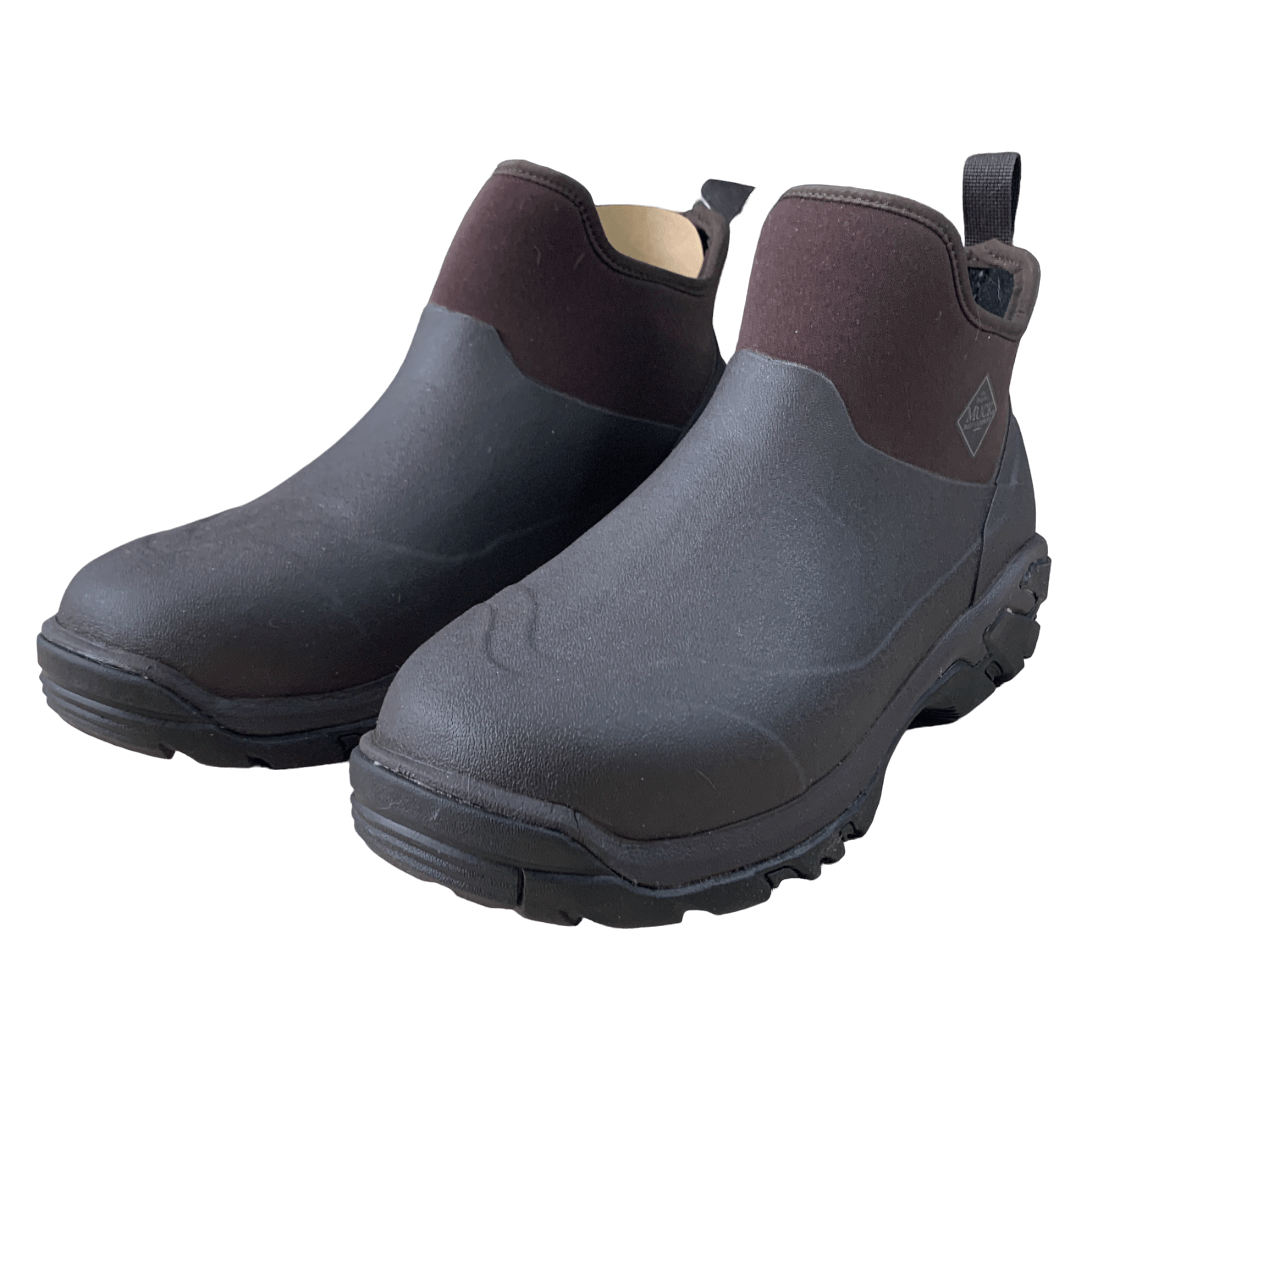 Muck Boot 'Woody Sport Ankle' 